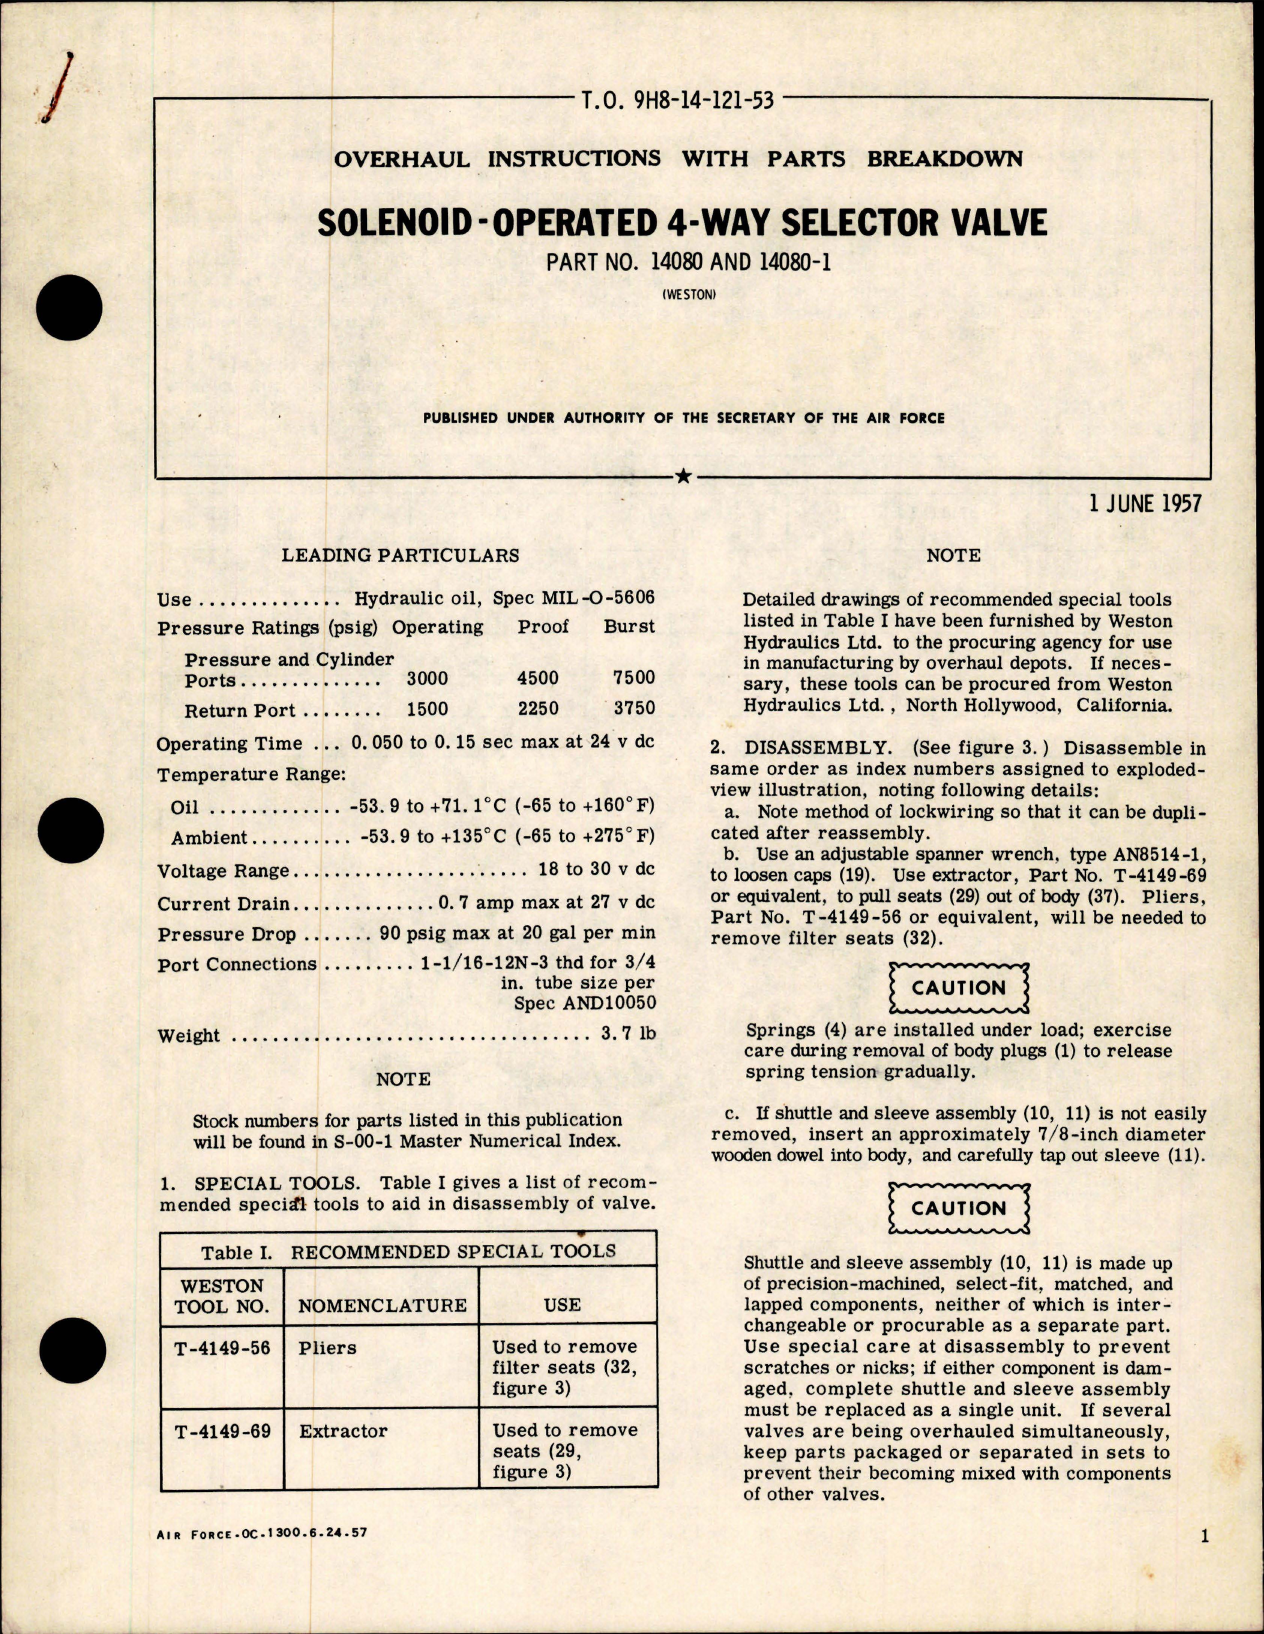 Sample page 1 from AirCorps Library document: Overhaul Instructions with Parts Breakdown for Solenoid Operated 4-Way Selector Valve - Parts 14080 and 14080-1 